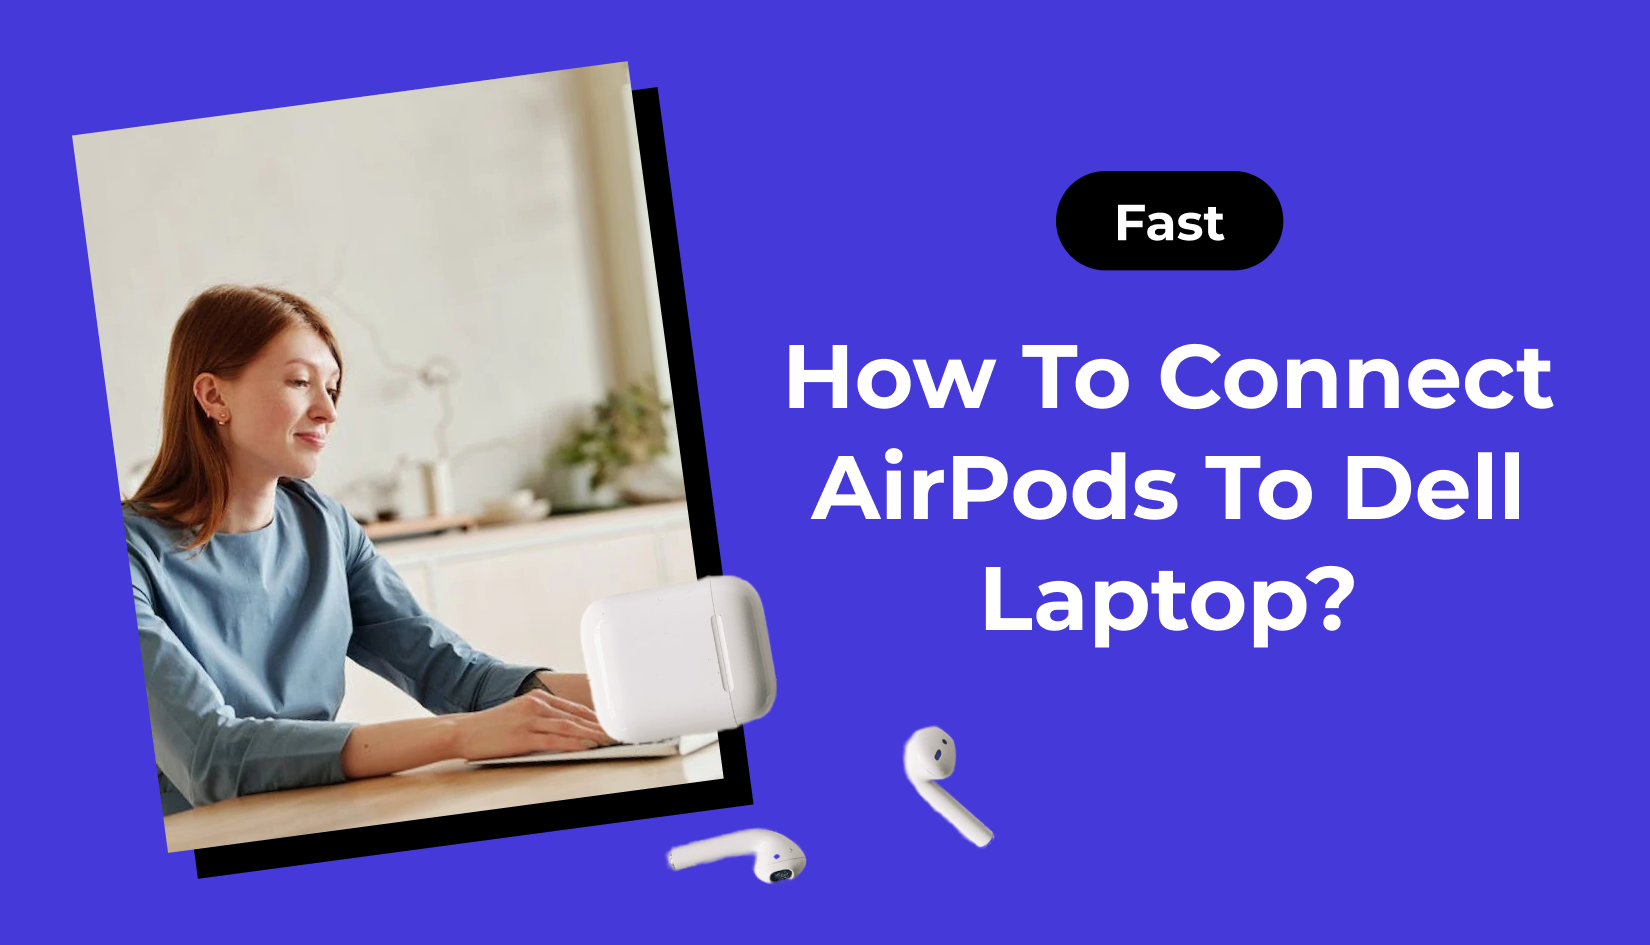 How To Connect AirPods To Dell Laptop? (Fast)